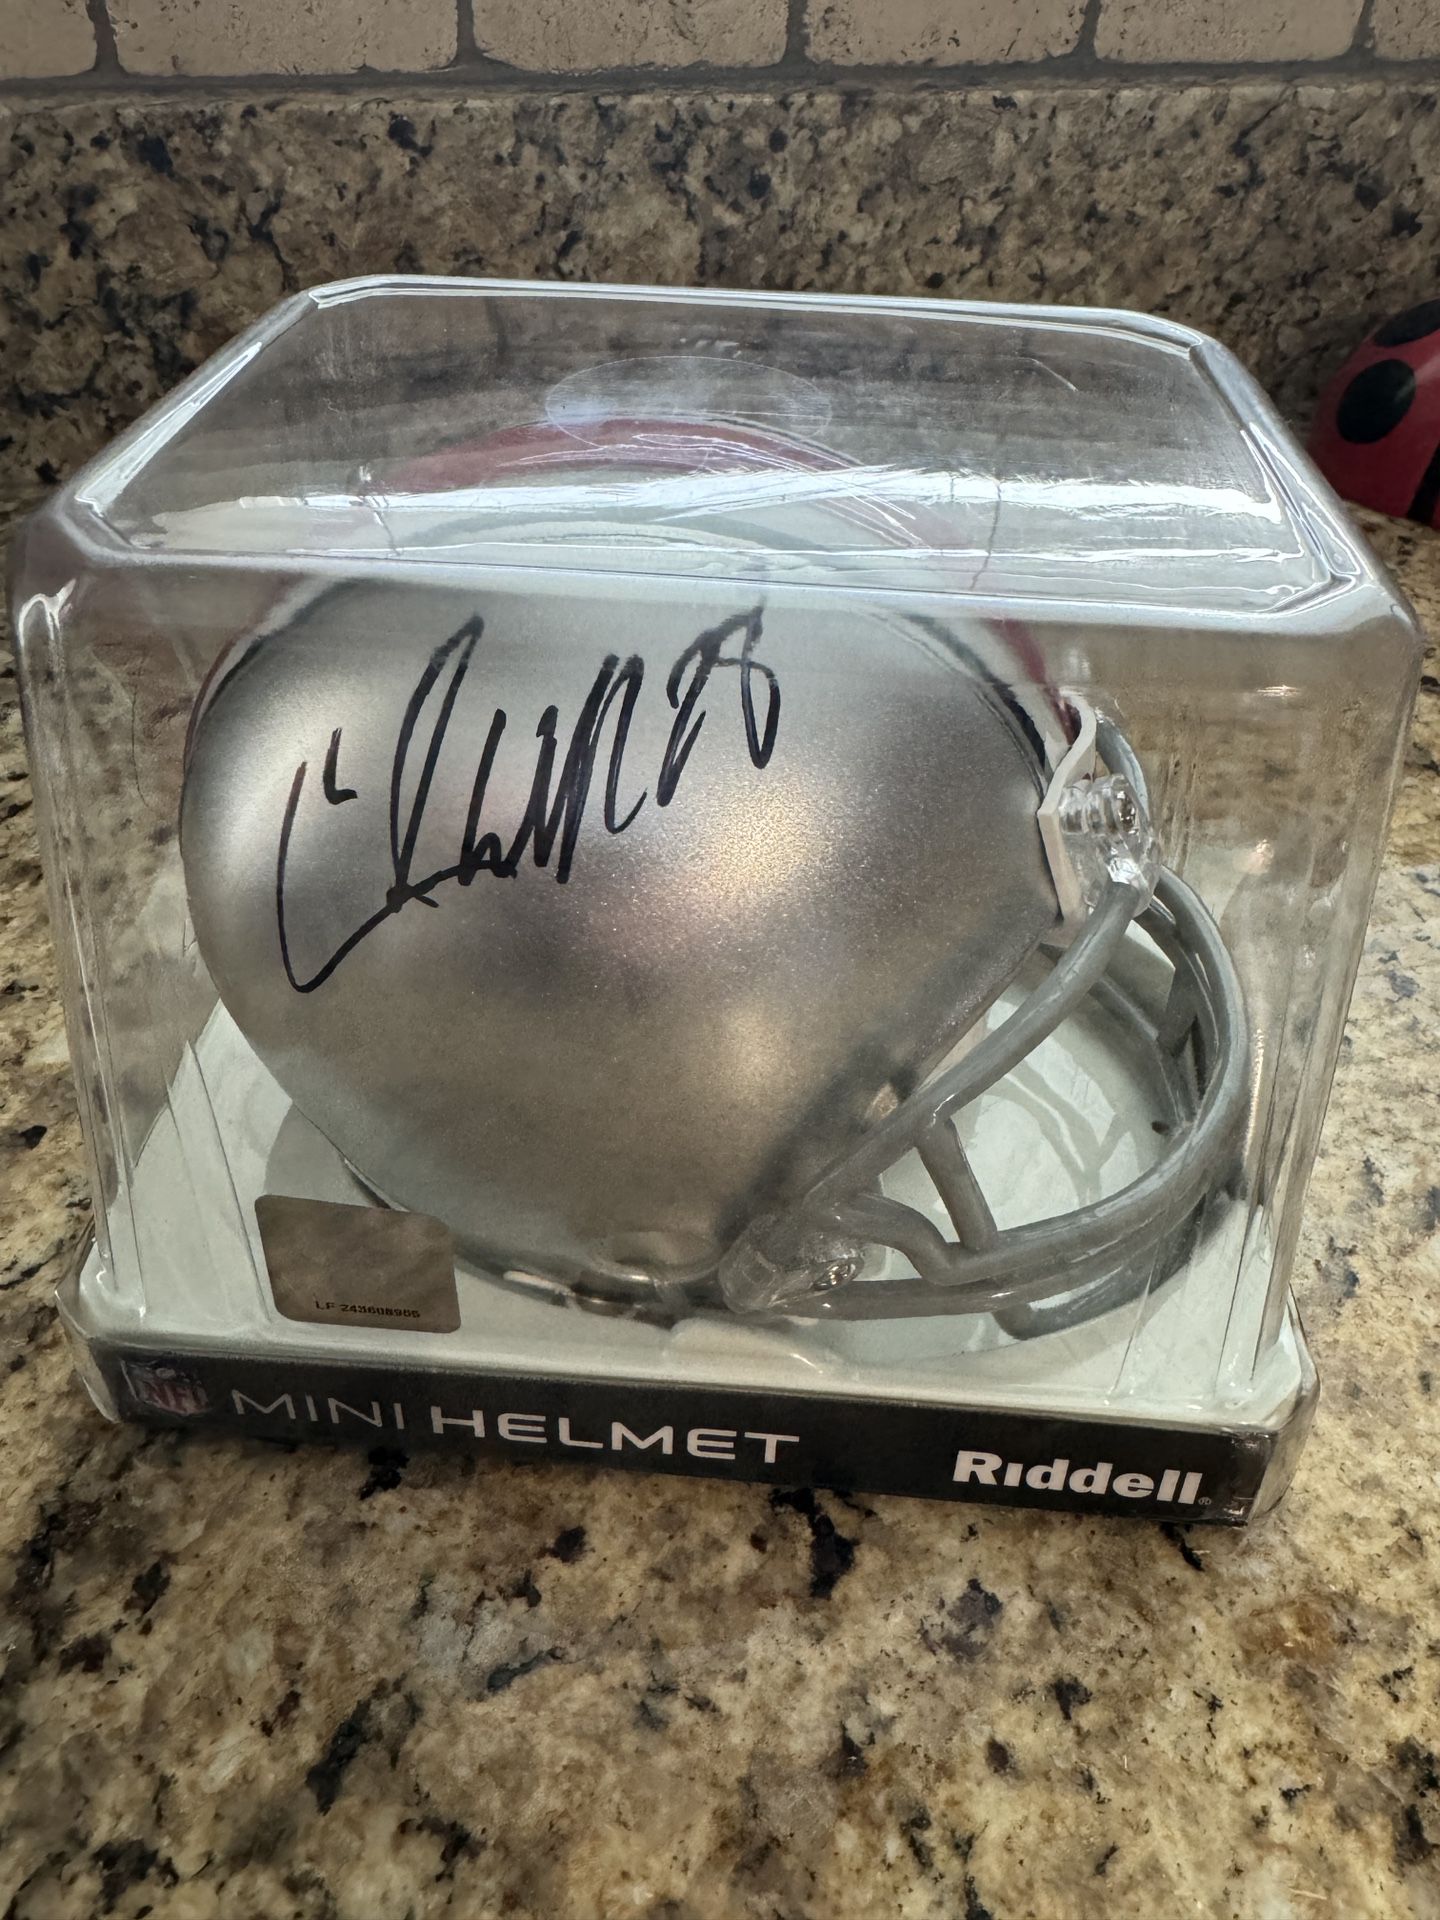 Ohio State Chris Beanie Wells Signed Mini Helmet!  In excellent shape!  Signed at team hotel.  